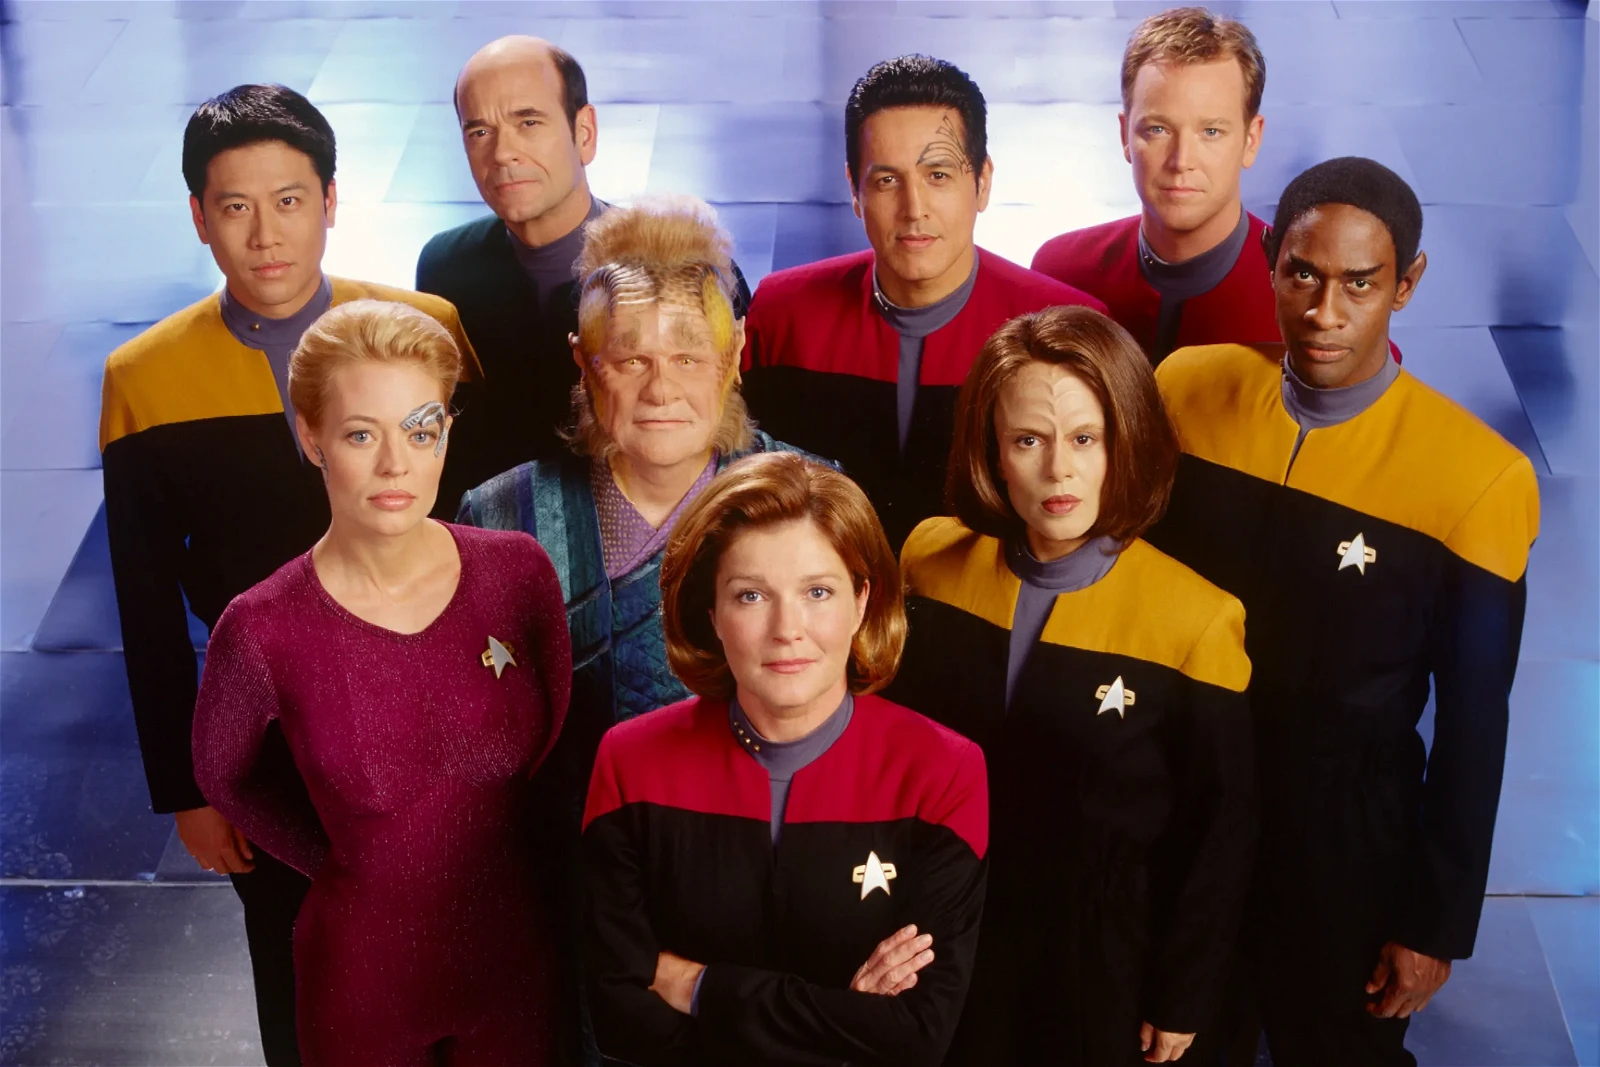 The crew of the USS Voyager in a still from Star Trek: Voyager